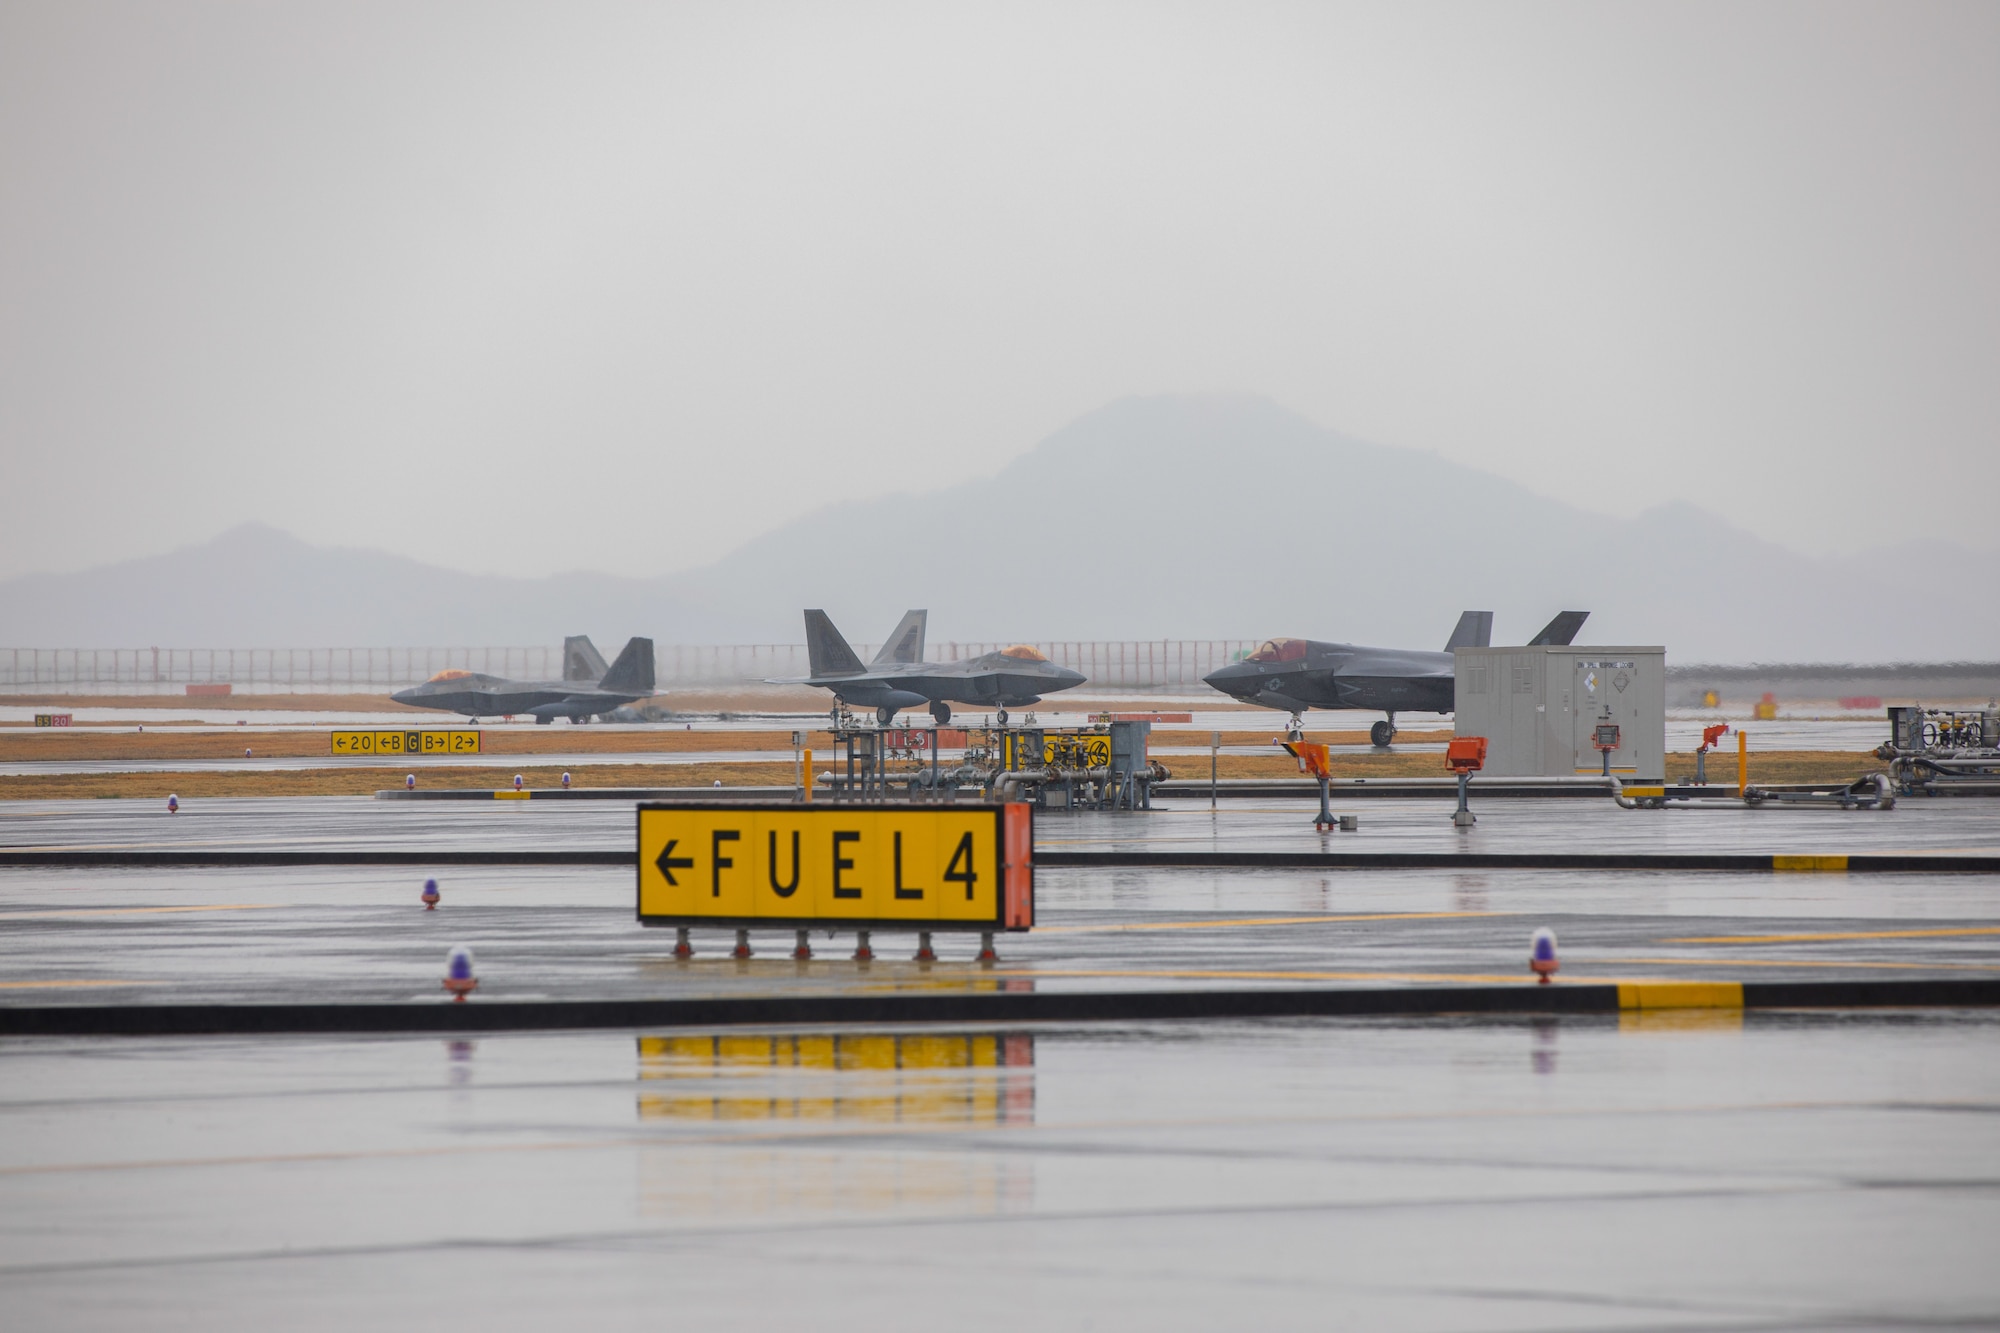 A U.S. Marine Corps F-35B Lightning II Aircraft with Marine Fighter Attack Squadron 121 and Air Force F-22 Raptors with the 199th Fighter Squadron taxi on the flight line at Marine Corps Air Station Iwakuni, Japan, March 12, 2021. Airmen with the 199th Fighter Squadron and the 19th Fighter Squadron, based out of Joint Base Pearl Harbor-Hickam, Hawaii, deployed to MCAS Iwakuni to conduct local area training with U.S. Marine Corps units. This training event is designed to support a free and open Indo-Pacific by providing global reach and agility throughout the region. (U.S. Marine Corps photo by Lance Cpl. Triton Lai)